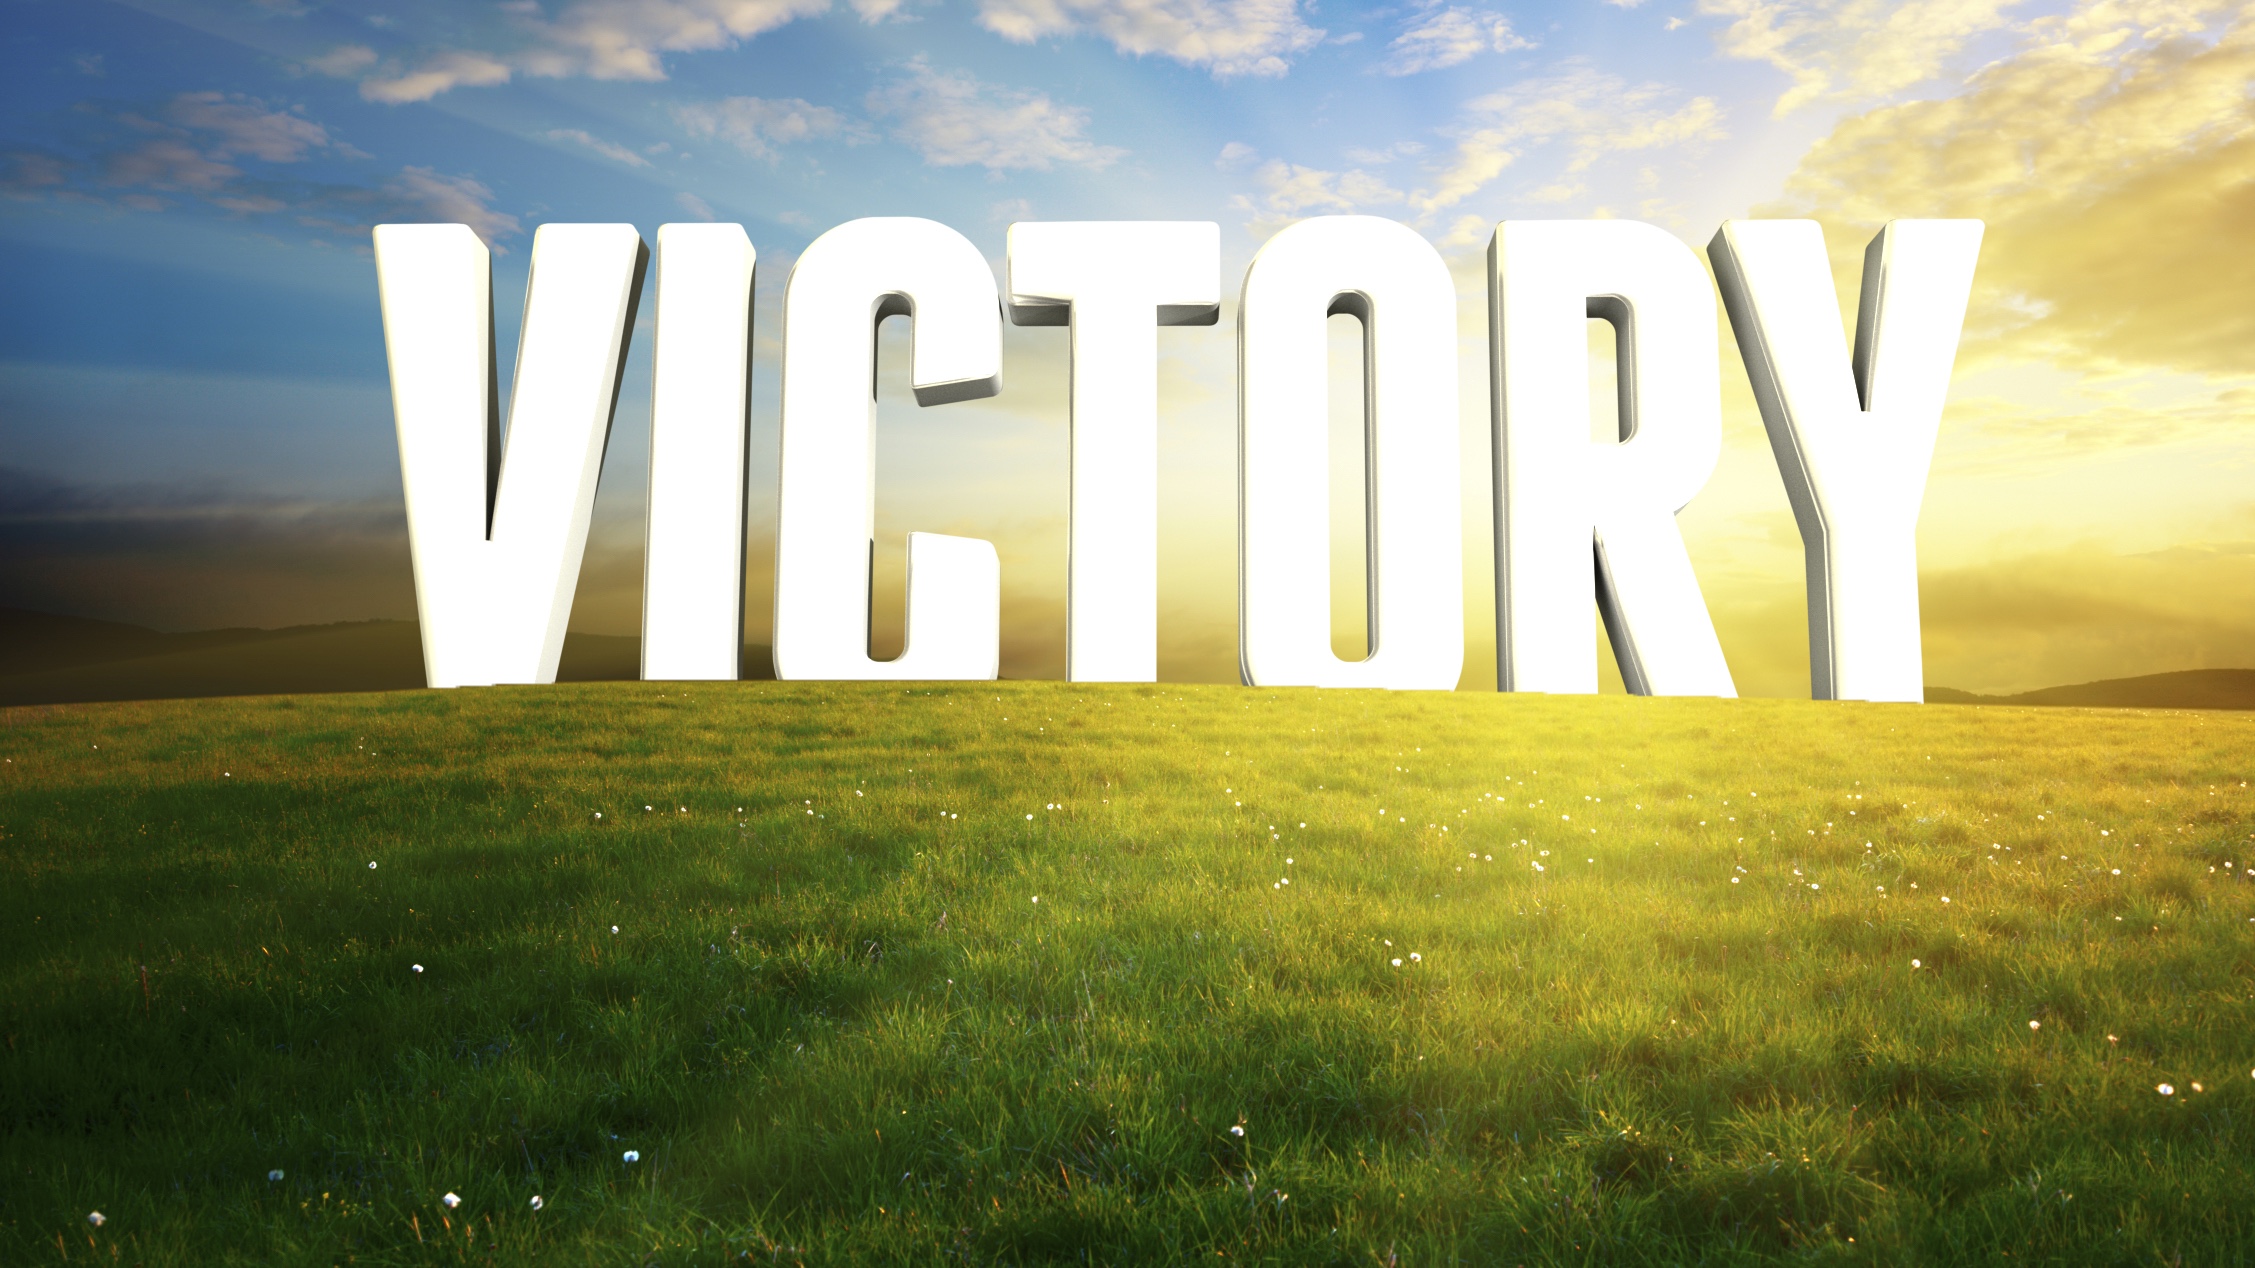 There is Victory Over Depression